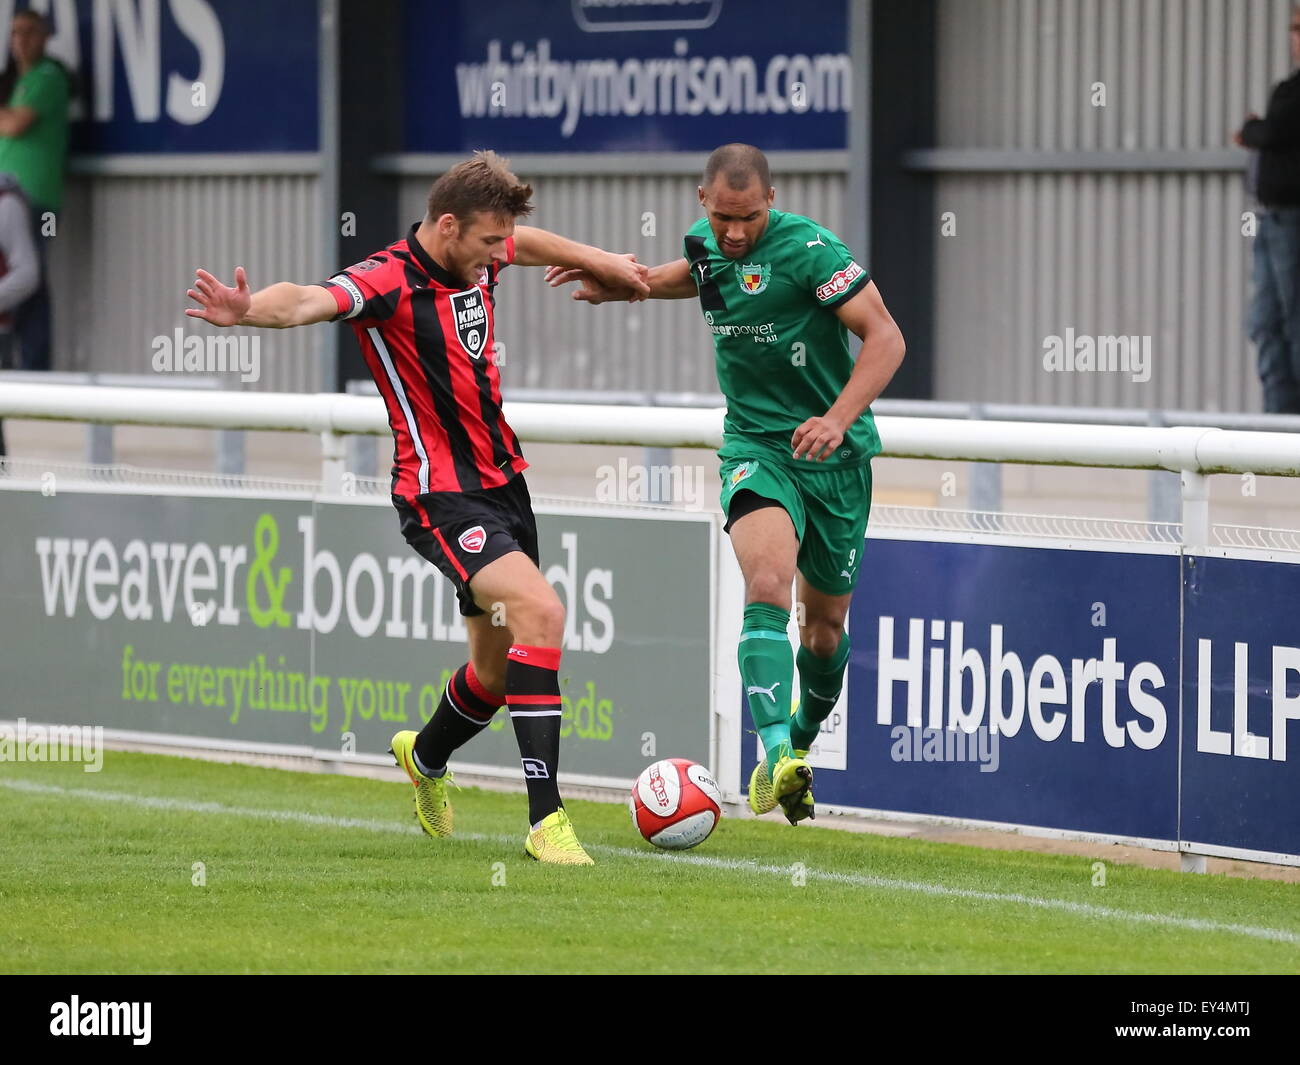 Nantwich, Cheshire, UK. 21st July, 2015. Nantwich Town entertain League Two Morecambe in a pre season friendly at The Weaver Stadium. Morecambe ran out 6-0 victors. Liam Shotton of Nantwich in action. Credit:  SJN/Alamy Live News Stock Photo